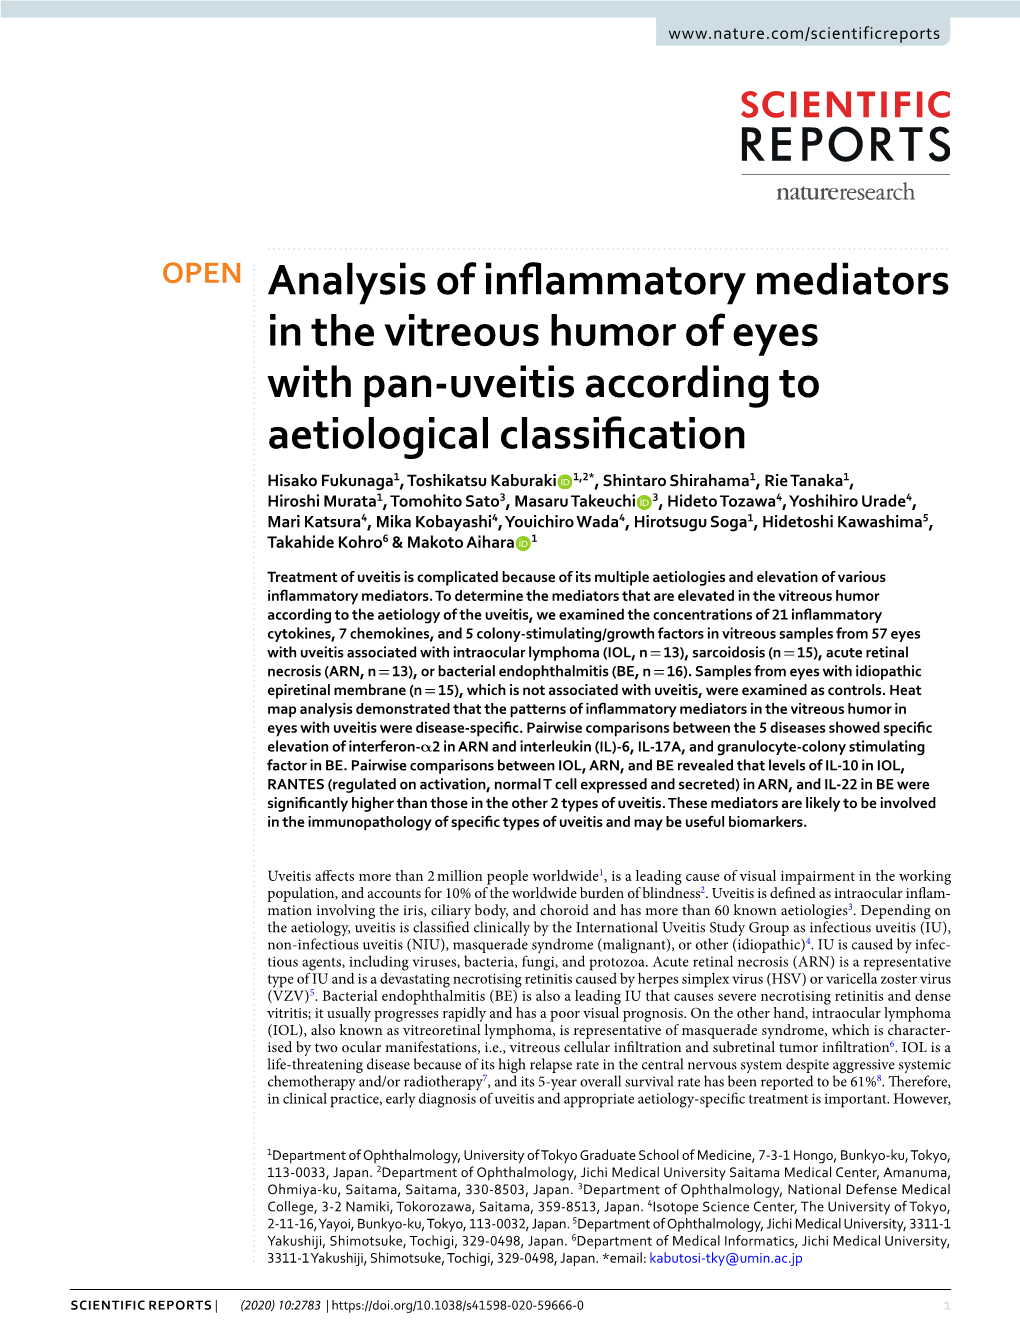 Analysis of Inflammatory Mediators in the Vitreous Humor of Eyes with Pan